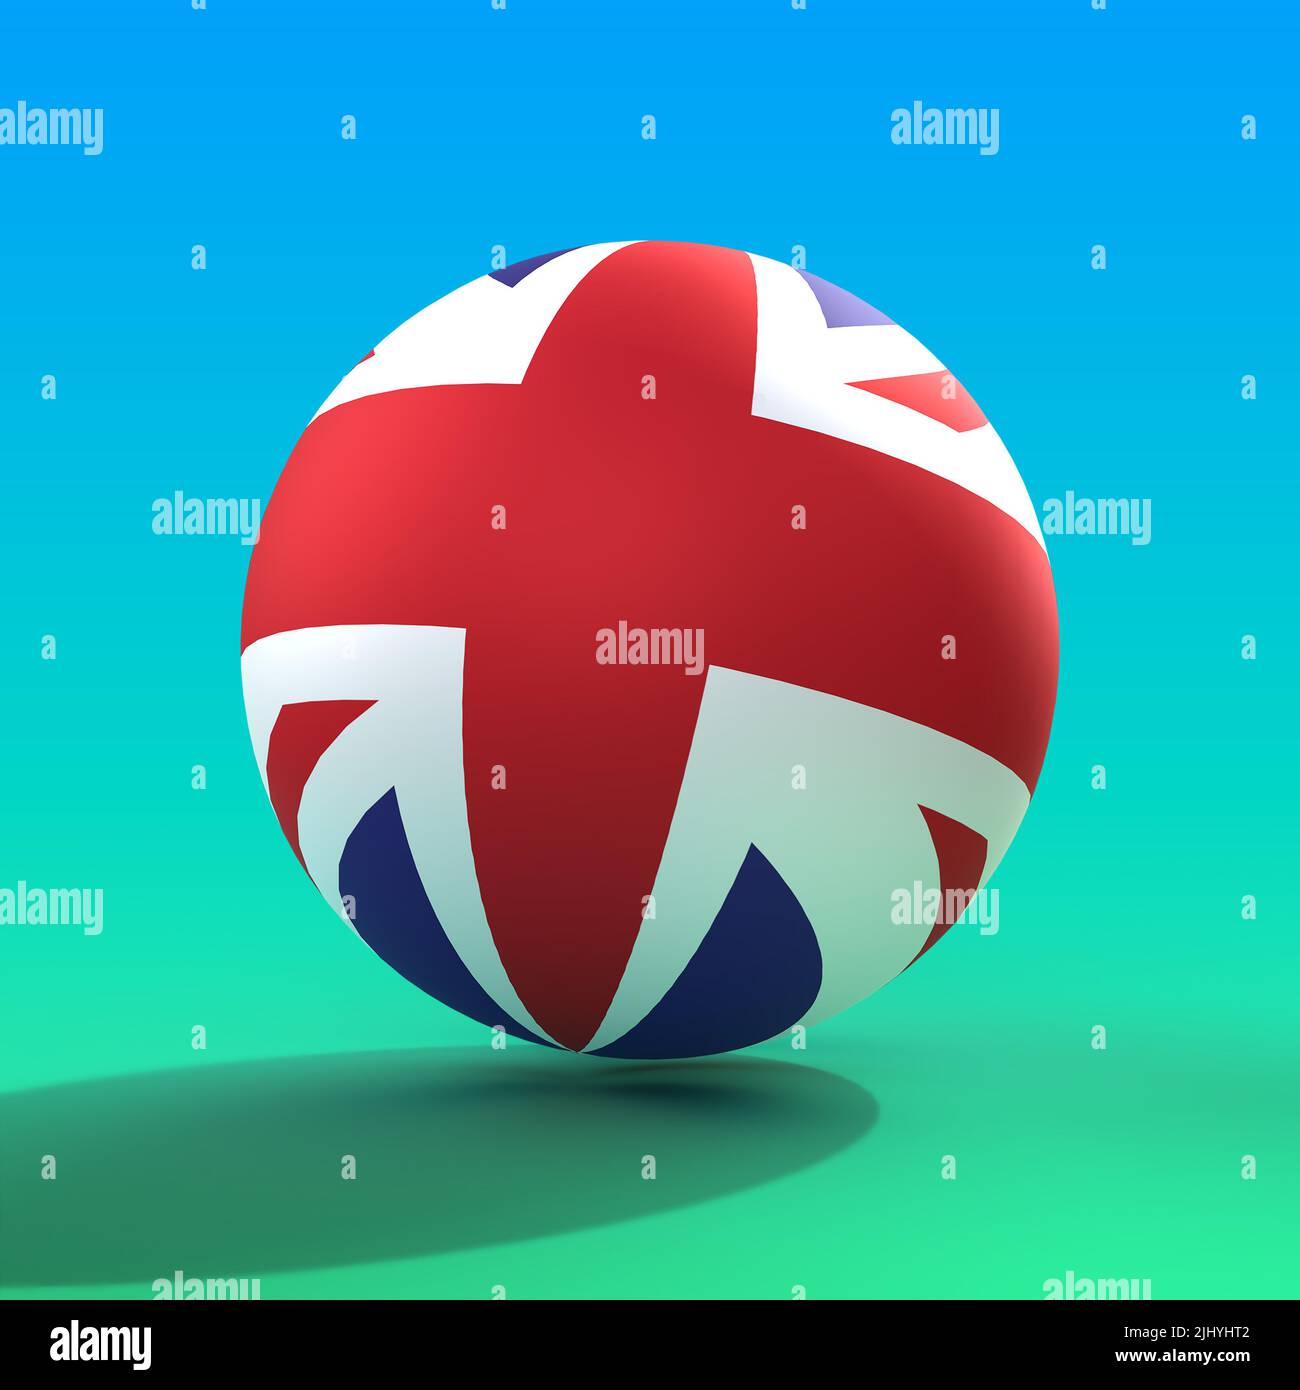 England Football 3D Render on a Blue and Green Background Stock Photo